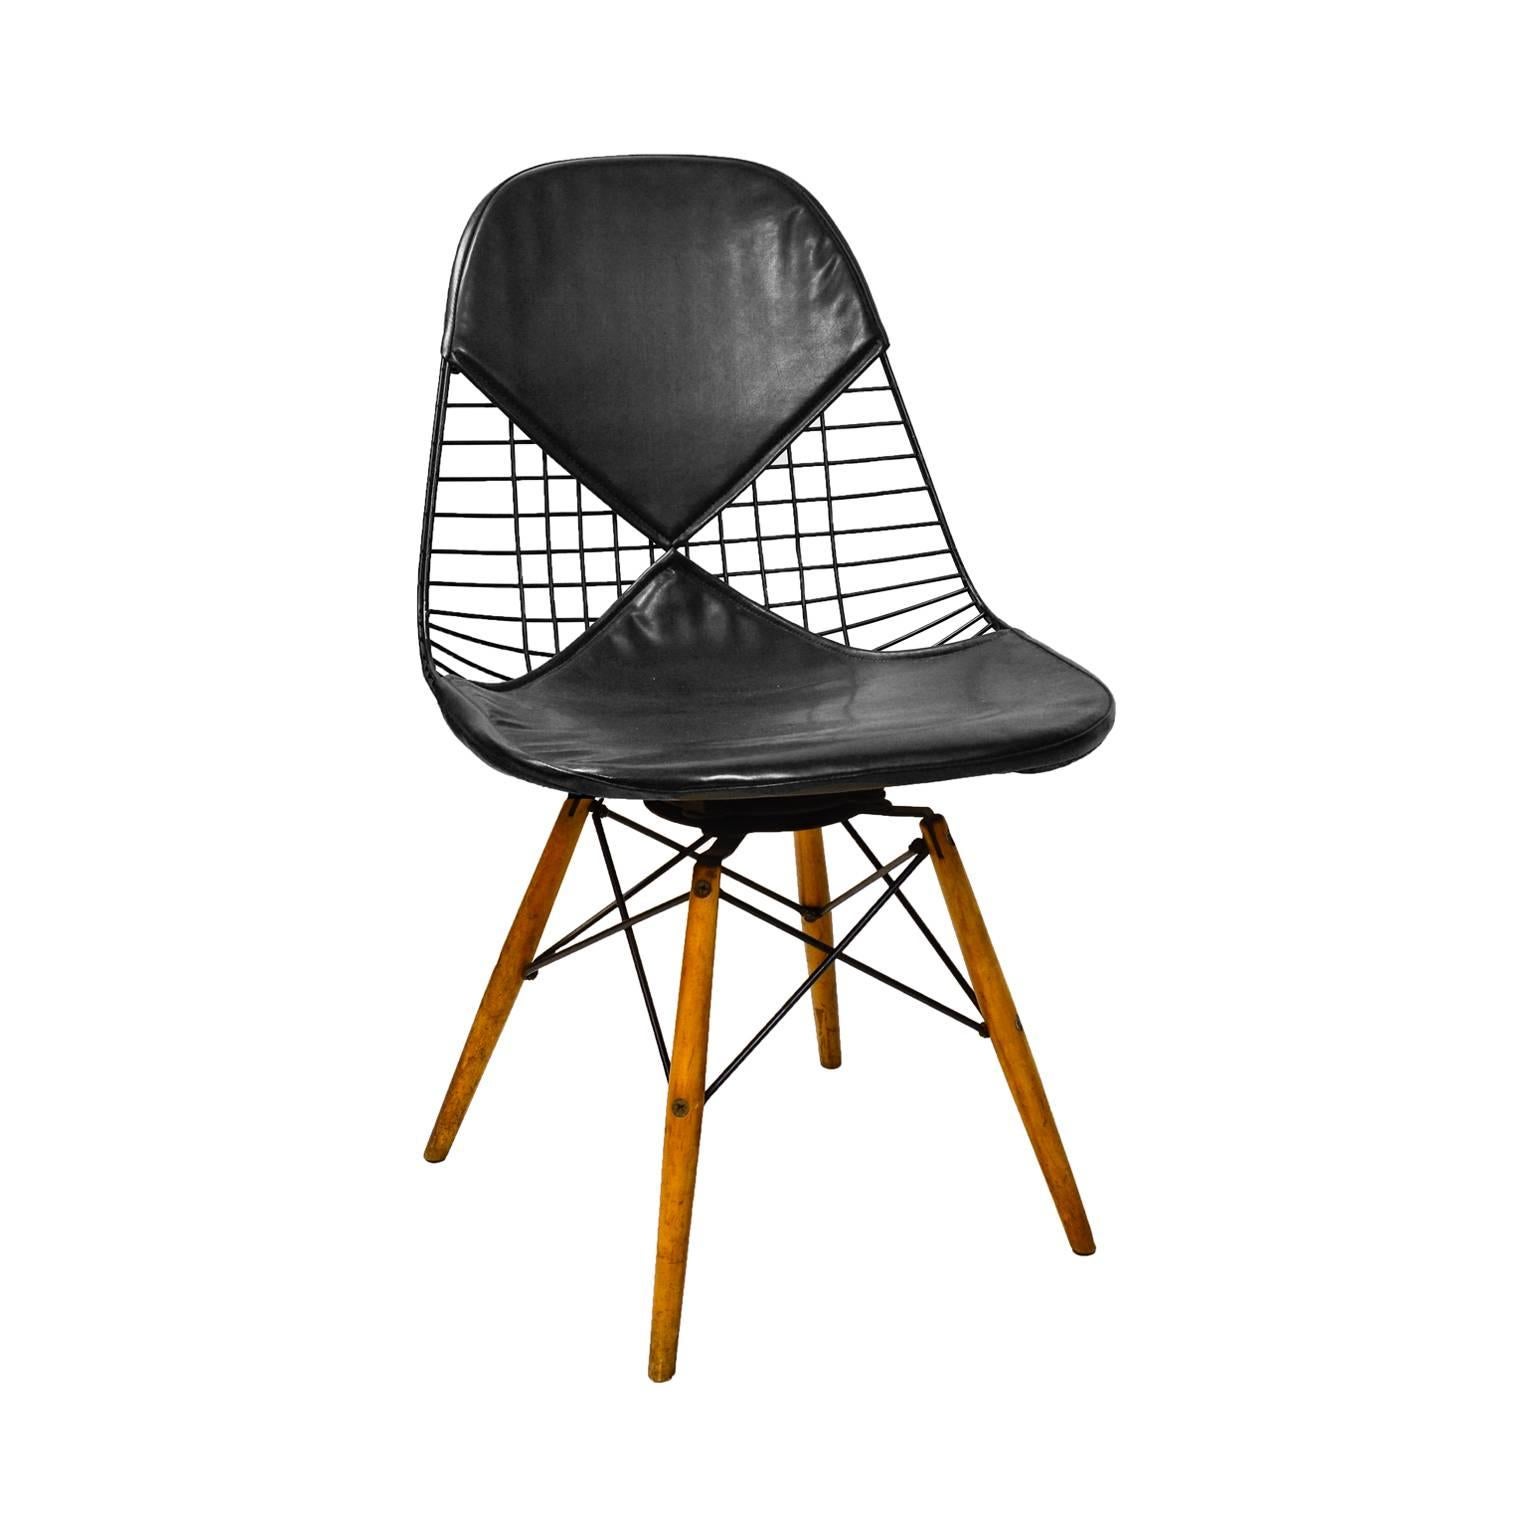 Charles and Ray Eames for Herman Miller DKW swivel side chair with bikini cover and walnut dowel legs, 1950.